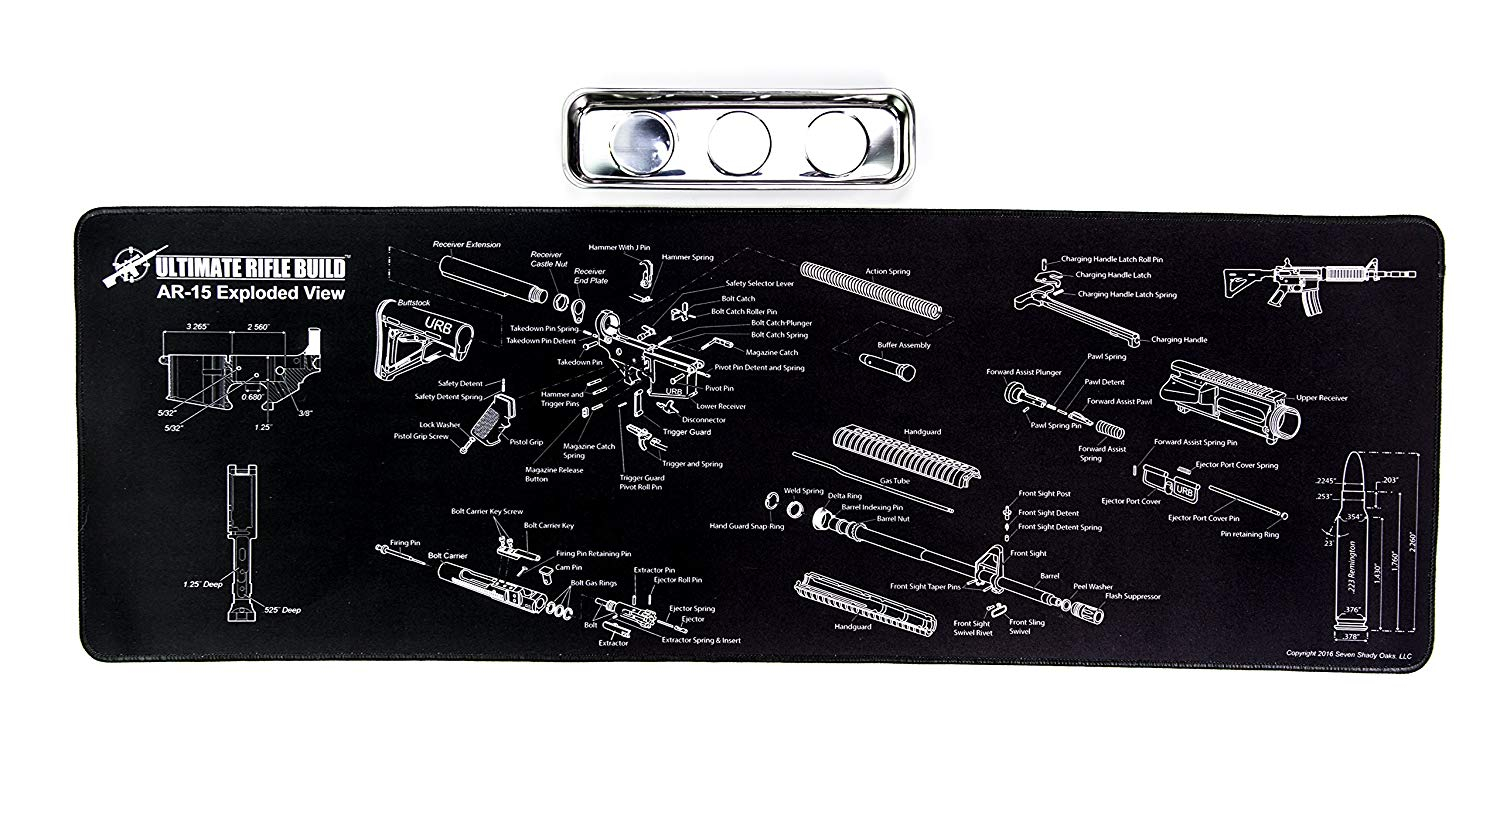 Ar 15 Parts Diagram Ar15 Gun Cleaning Mat With Exploded Parts Diagram Bonus Magnetic Parts Tray Boxed For Gift Giving 1995 Free Sh Over 25